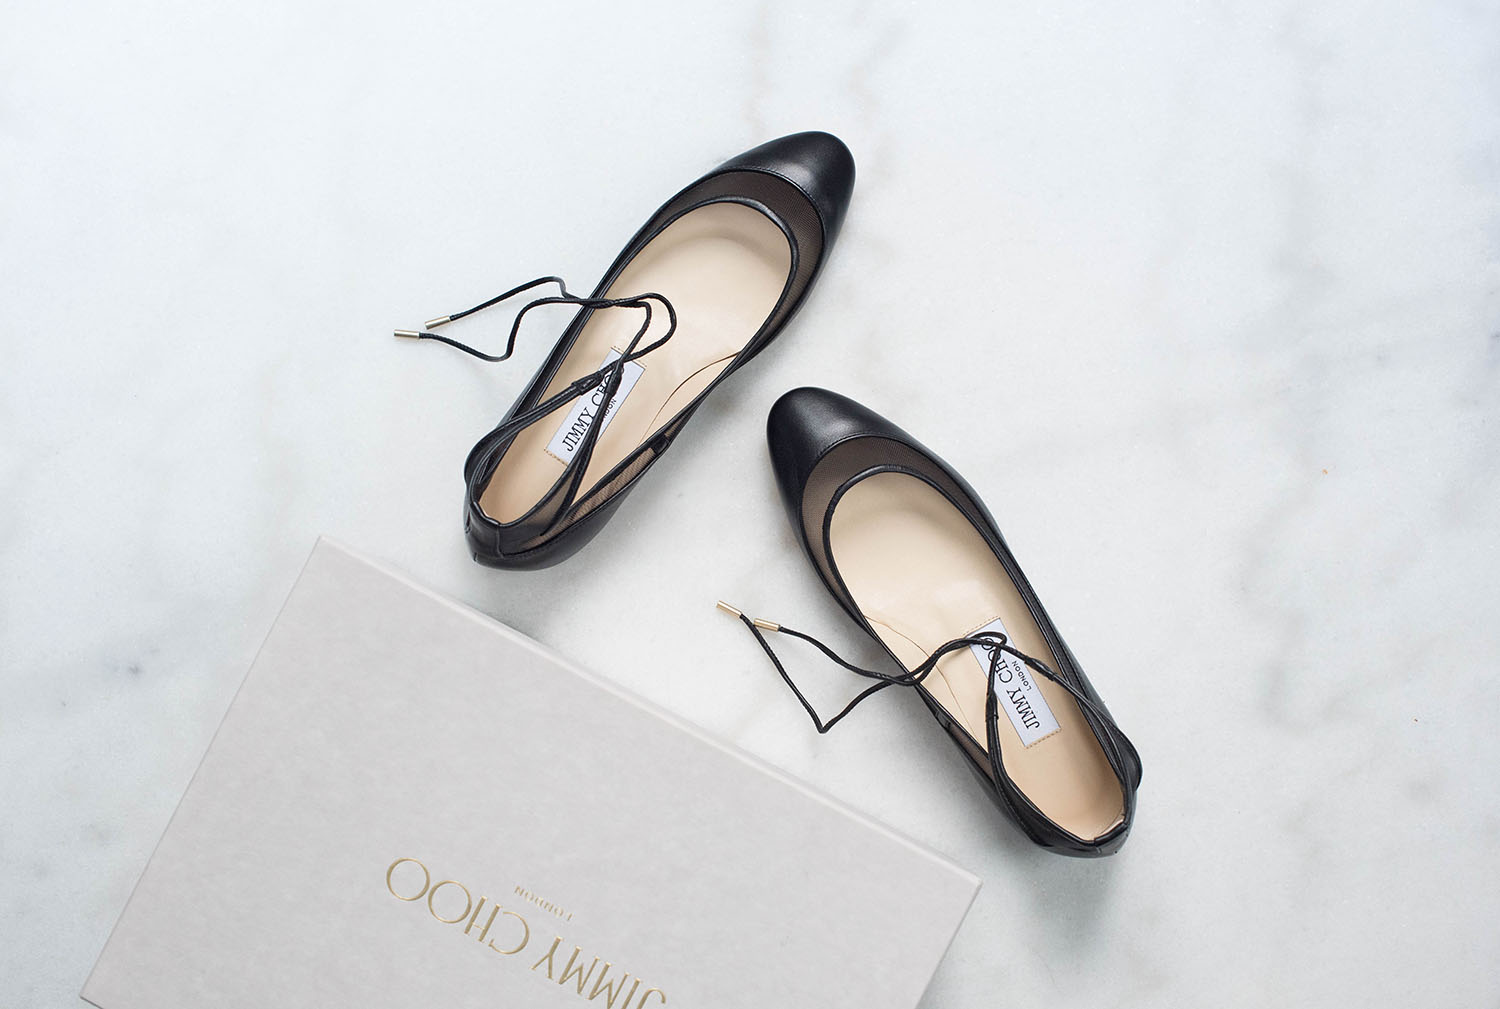 Coco & Vera - Jimmy Choo flats on a white marble background